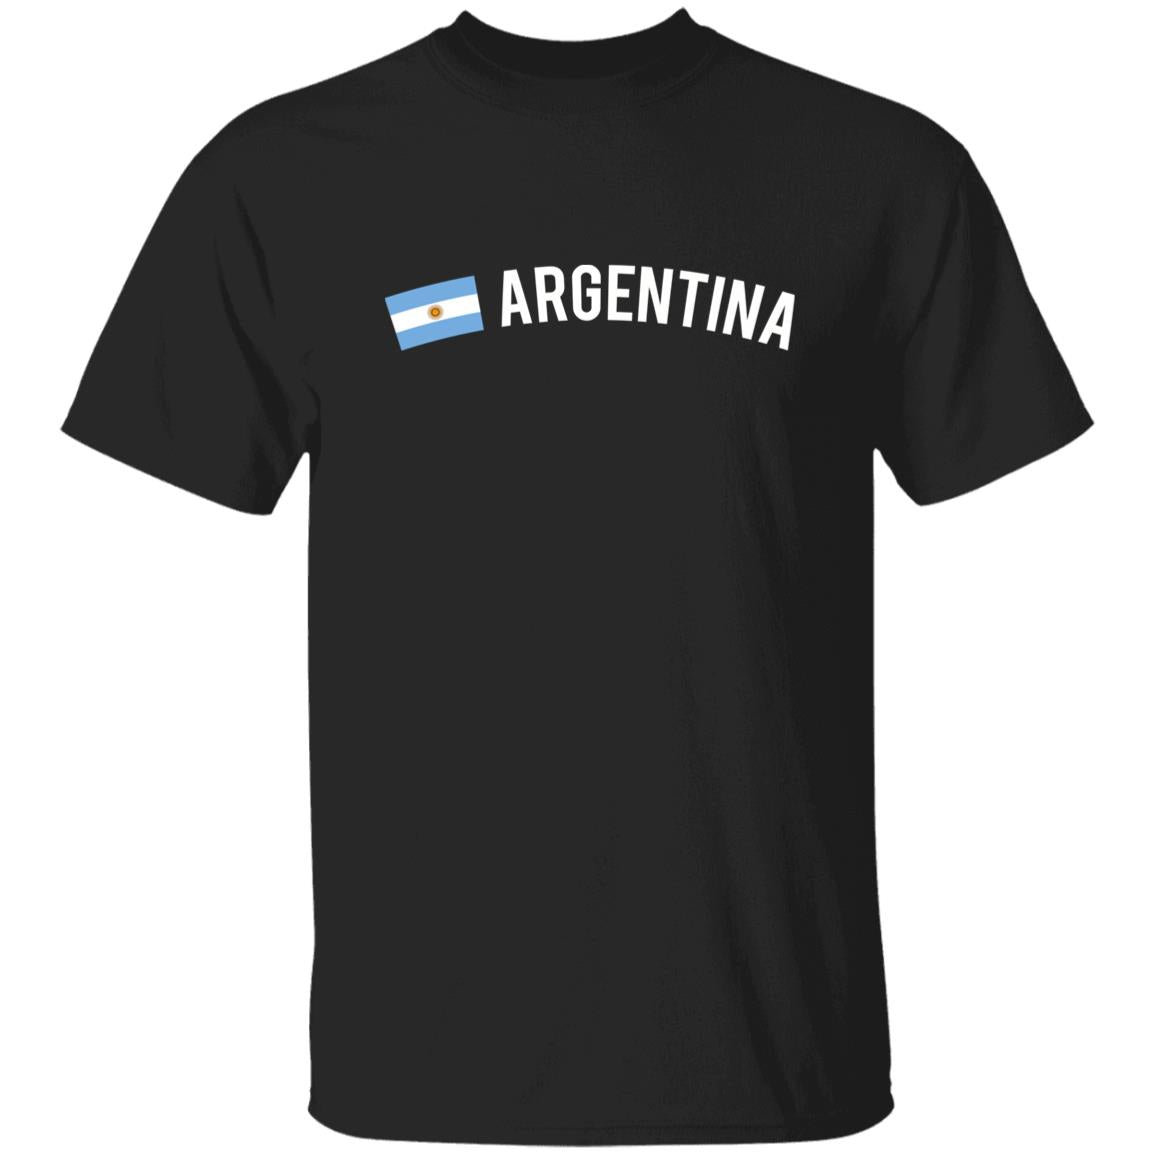 Argentina Unisex T-shirt gift Argentinian flag tee Buenos Aires White Black Dark Heather-Family-Gift-Planet